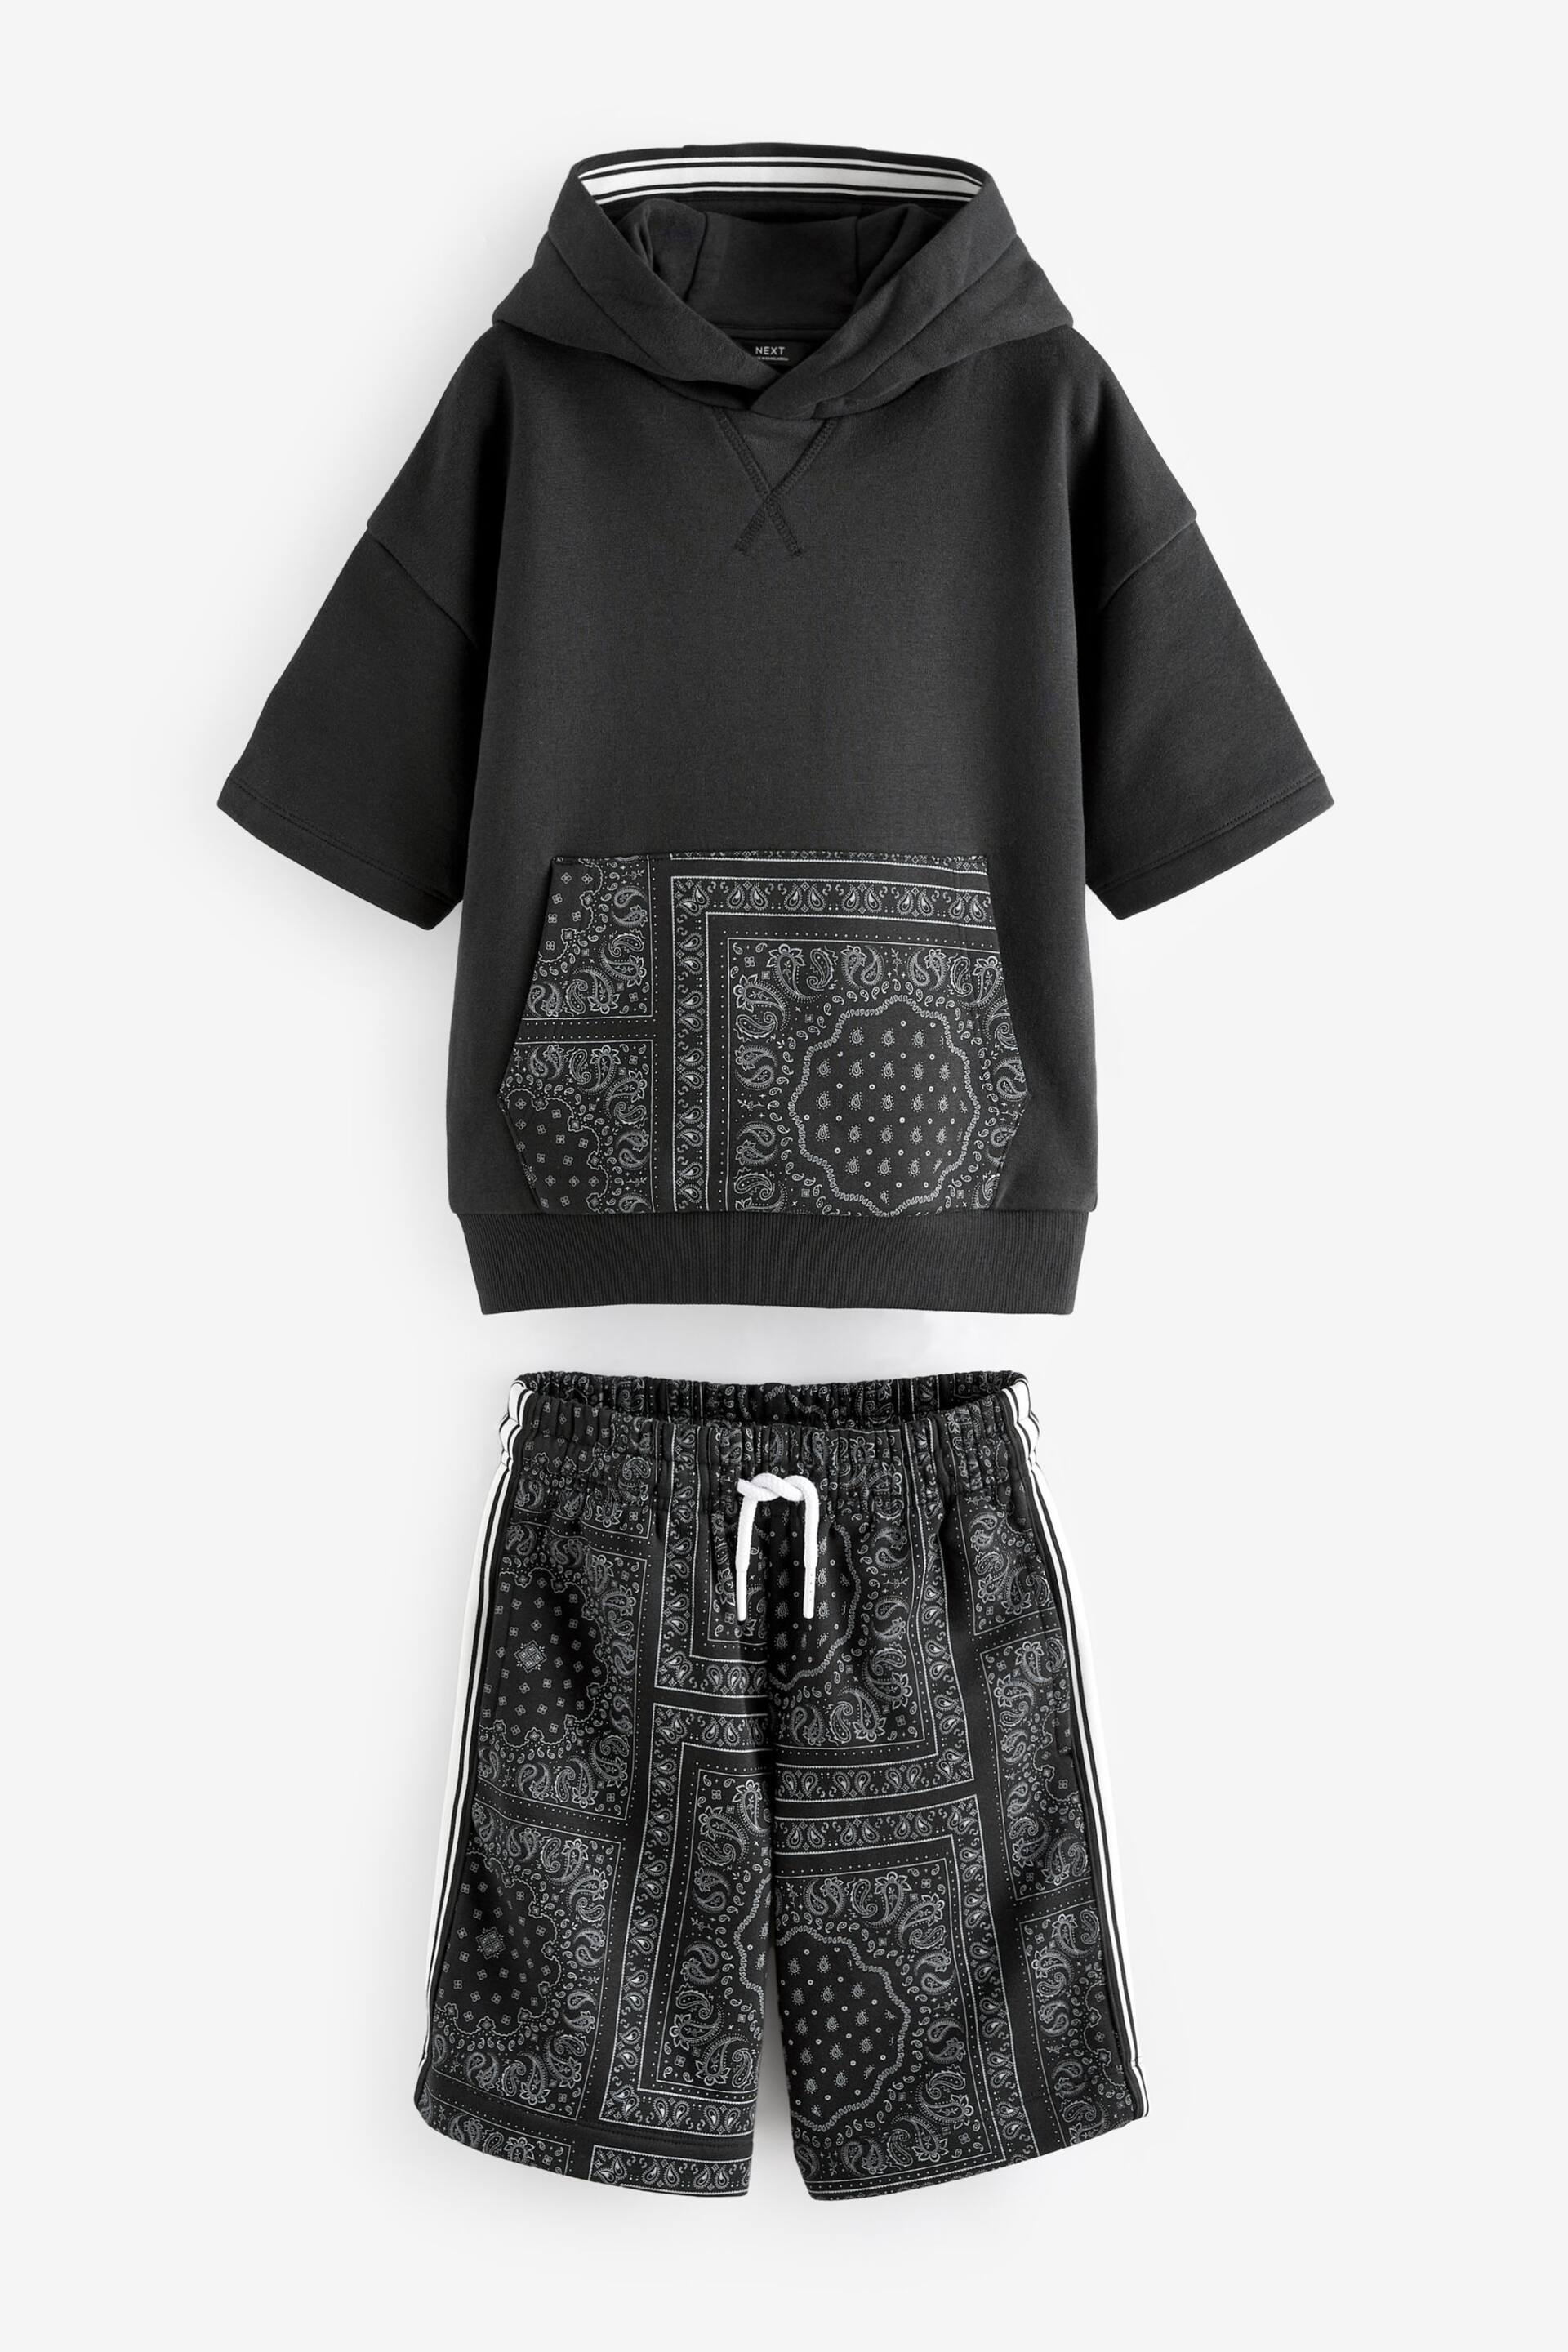 Black Short Sleeve Hoodie and Shorts Set (3-16yrs) - Image 2 of 6